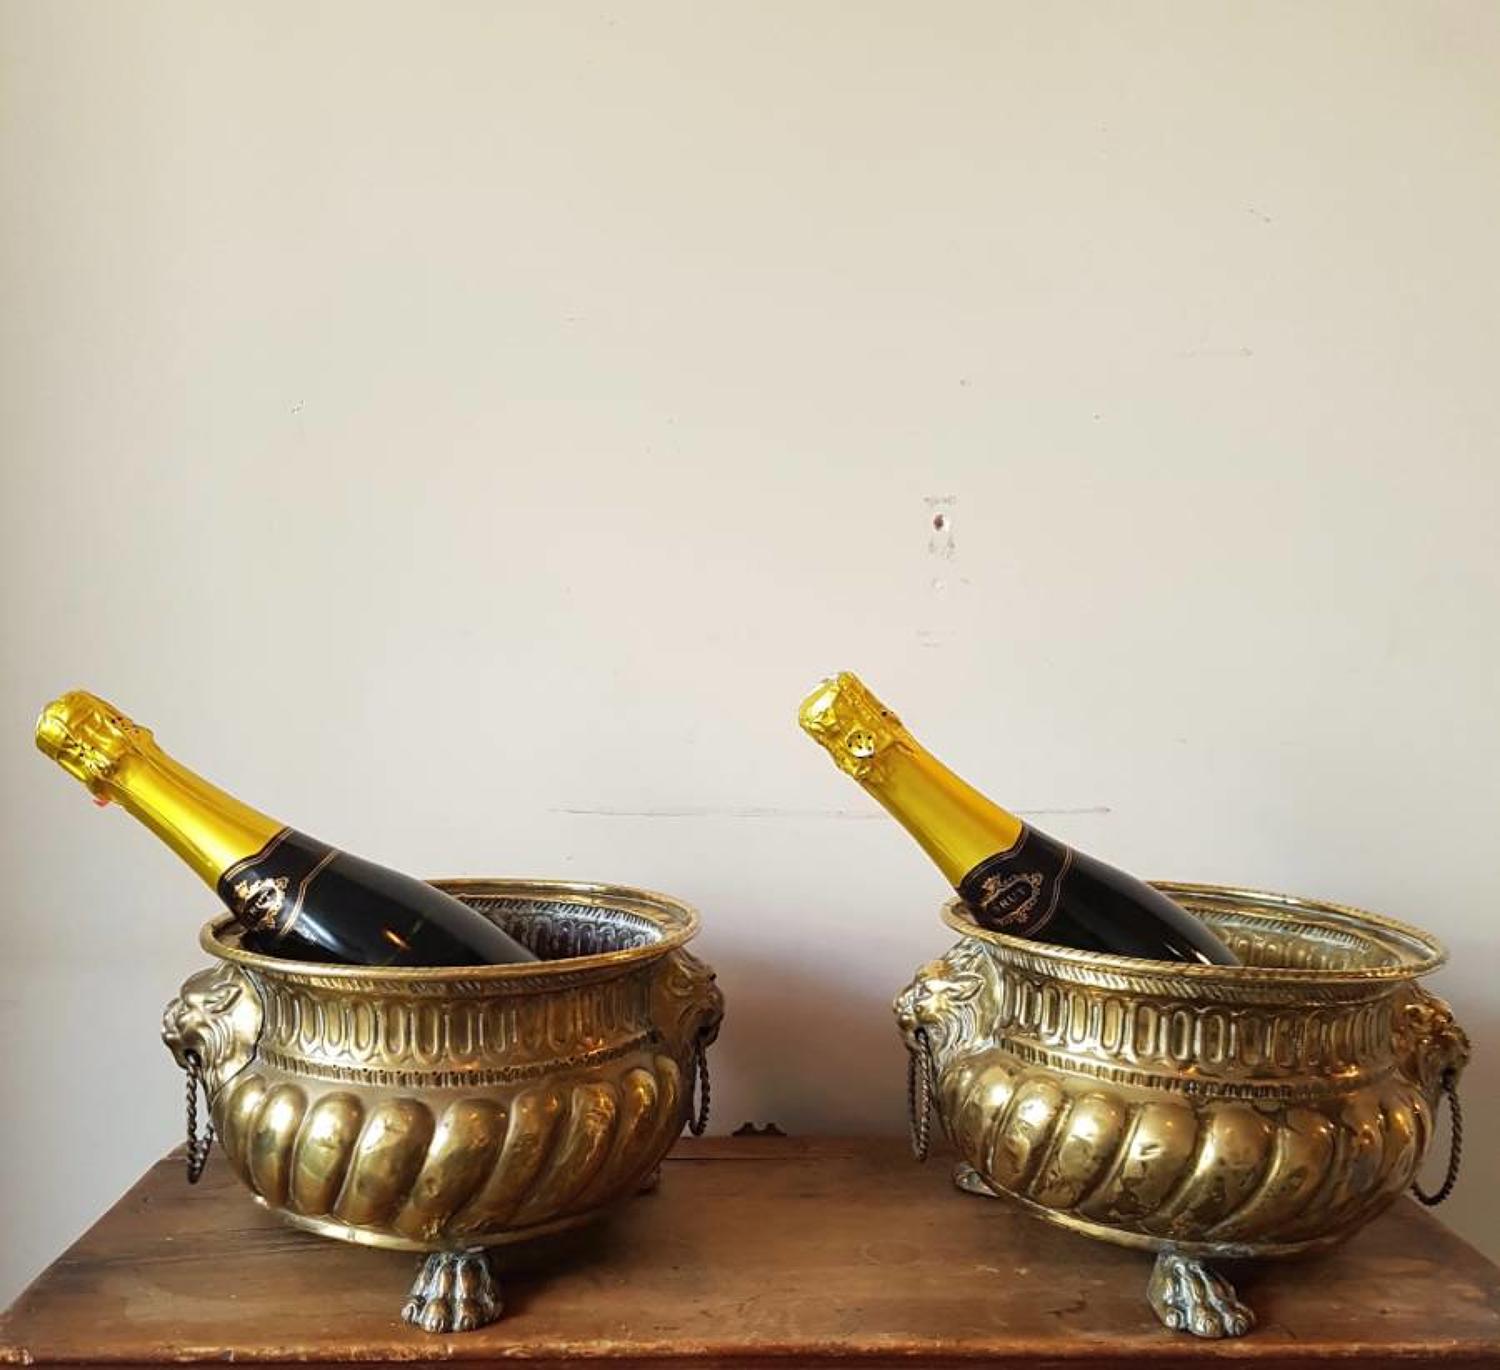 A pair of nineteenth century wine coolers